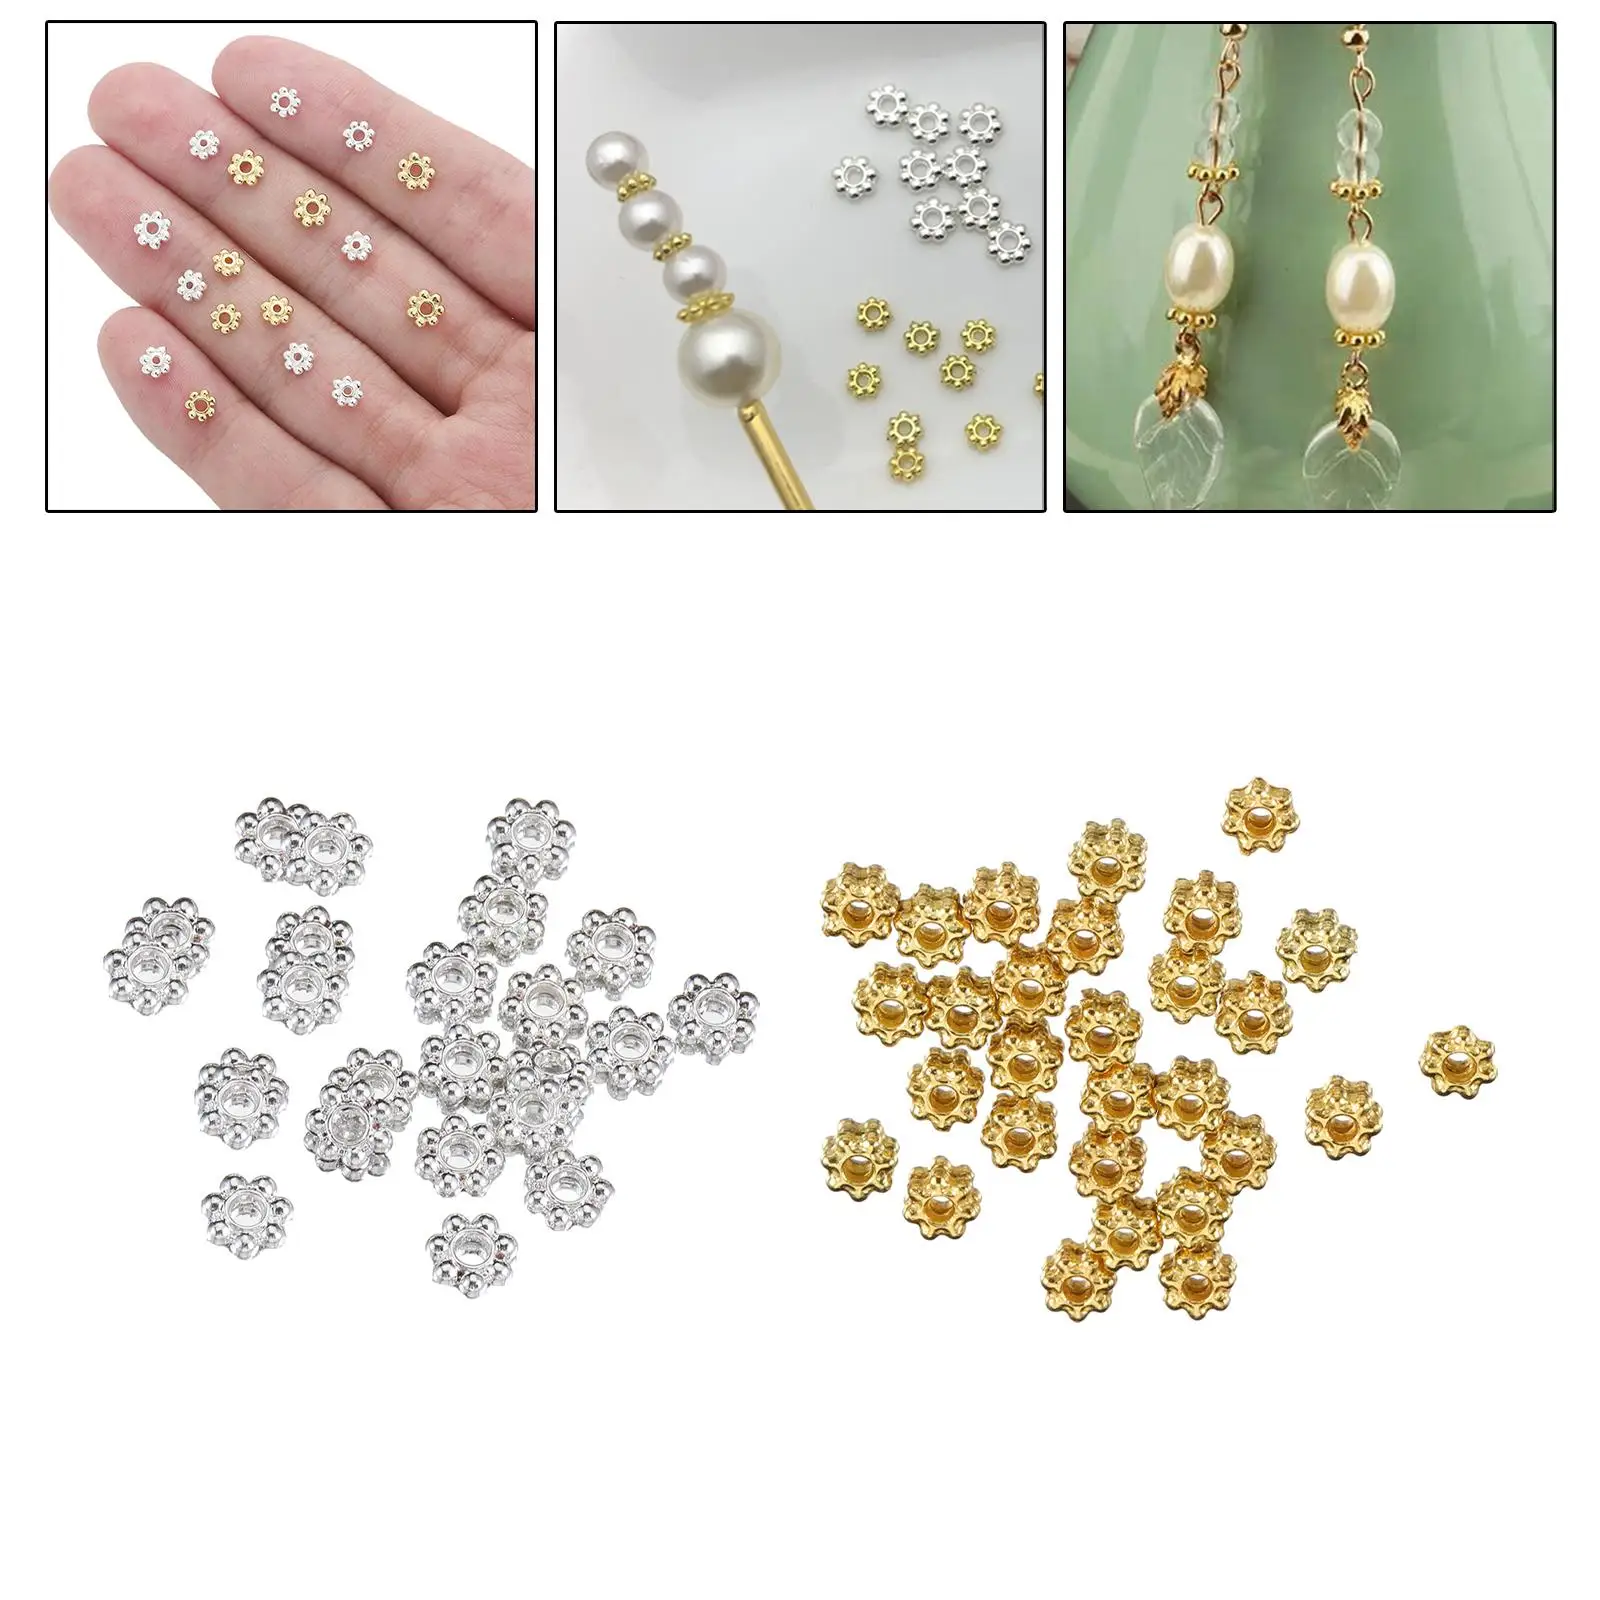 200Pcs Snowflake Spacer Beads Set DIY Decorative Copper Loose Beads for Jewelry Making Findings Bracelet Rings Earring Pendants